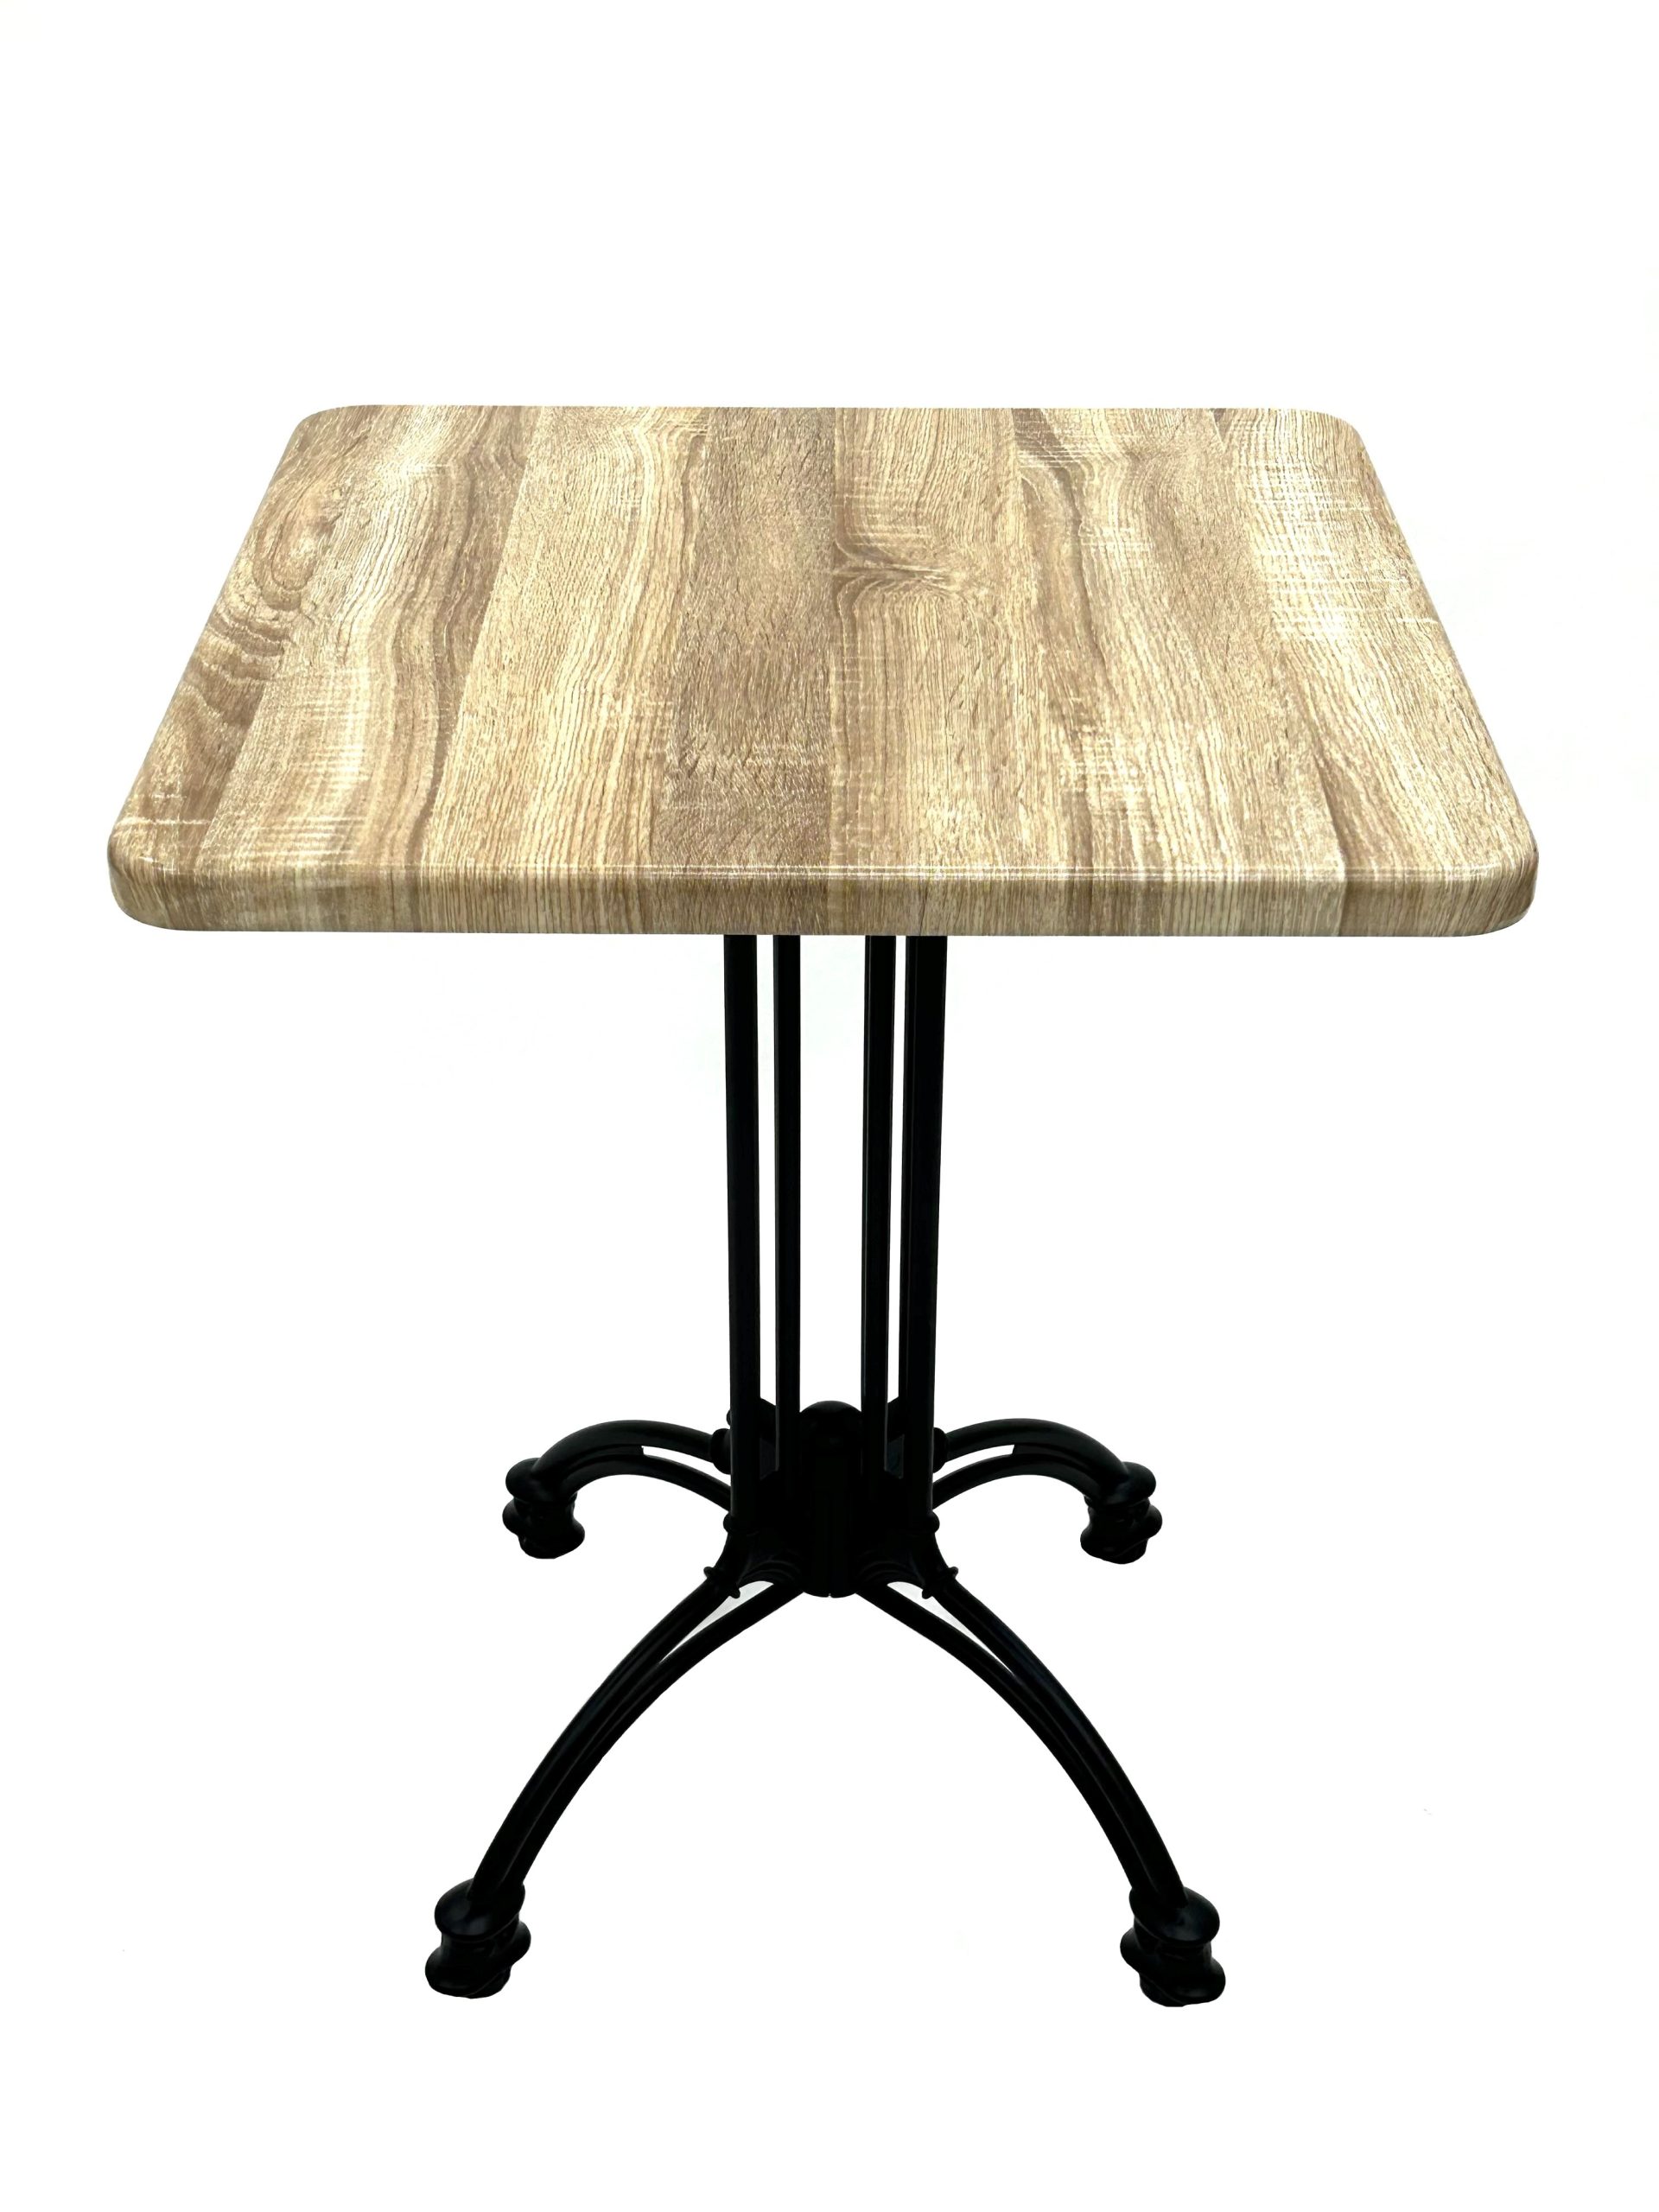 UK Suppliers Of High Quality Monza Bistro Tables